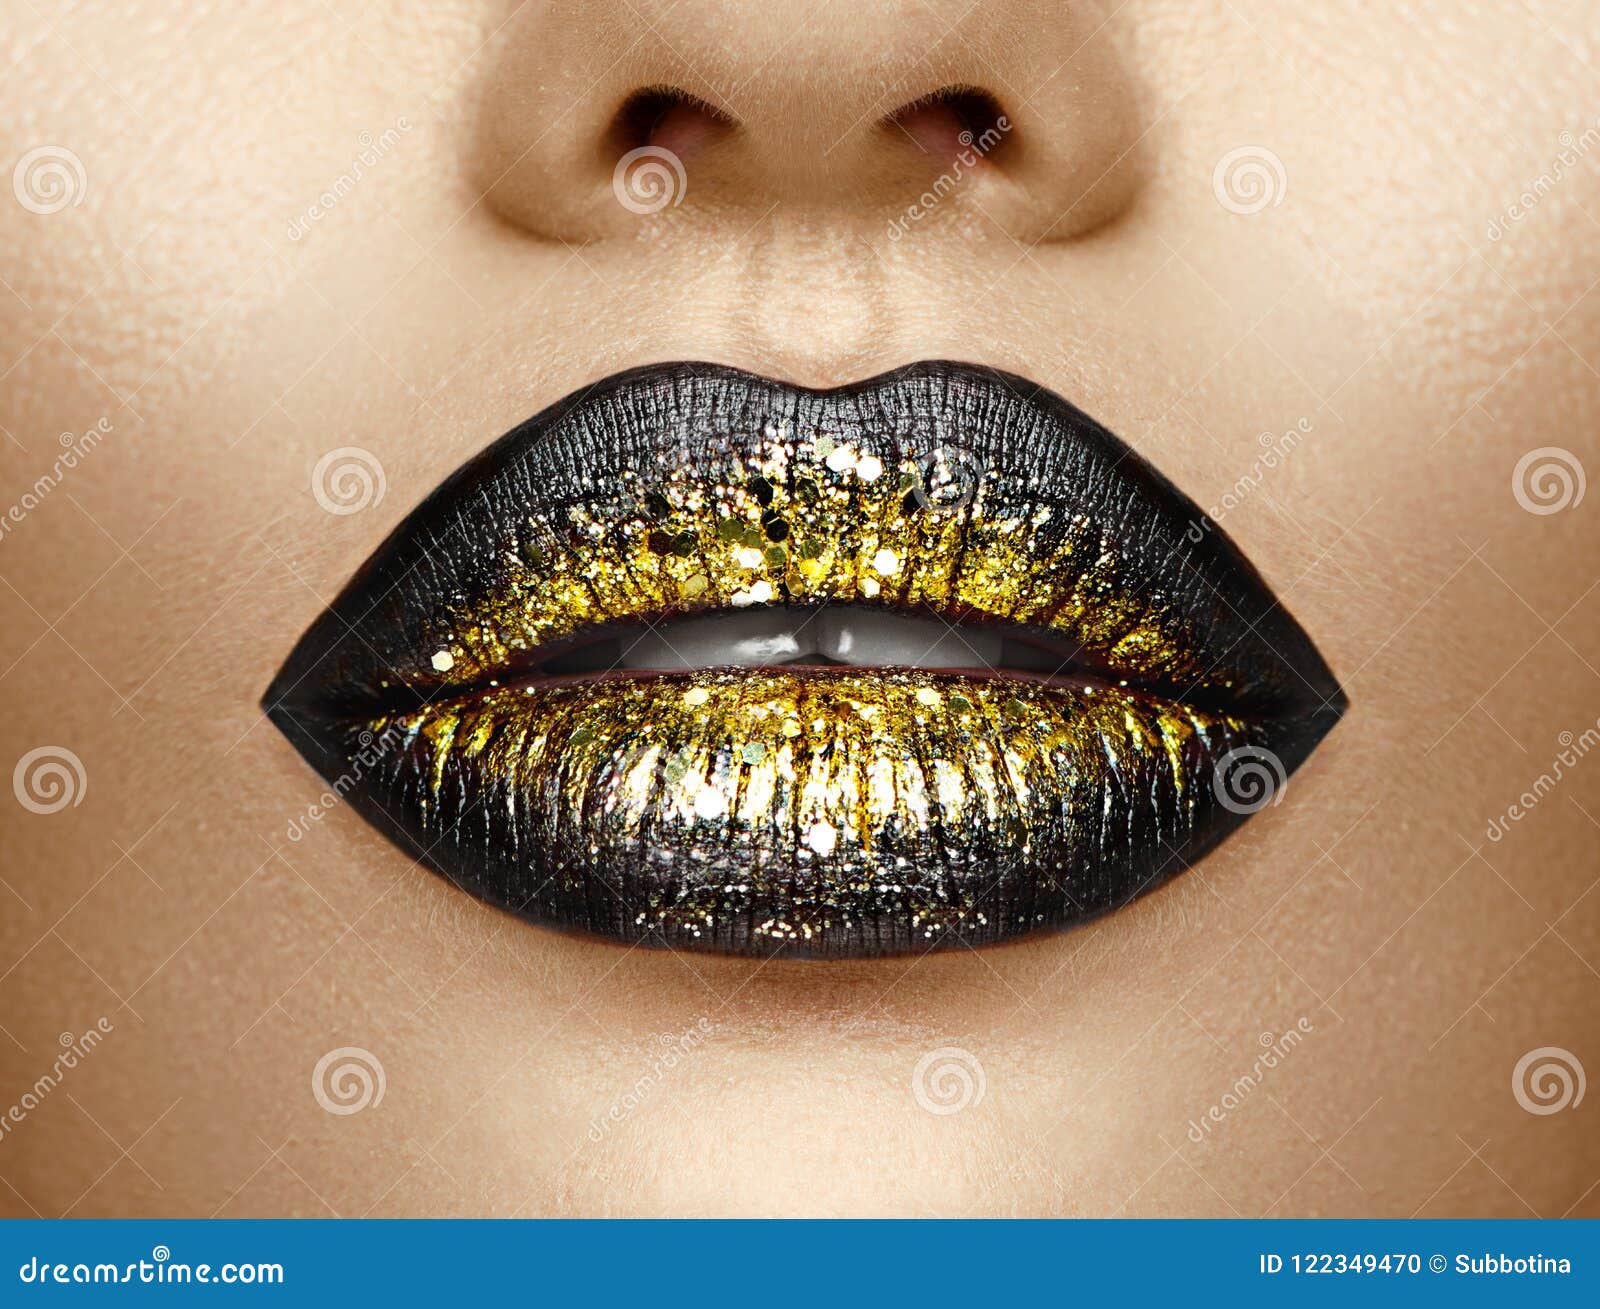 lips makeup. beauty high fashion gradient lips makeup sample, black with golden color. mouth. lipstick